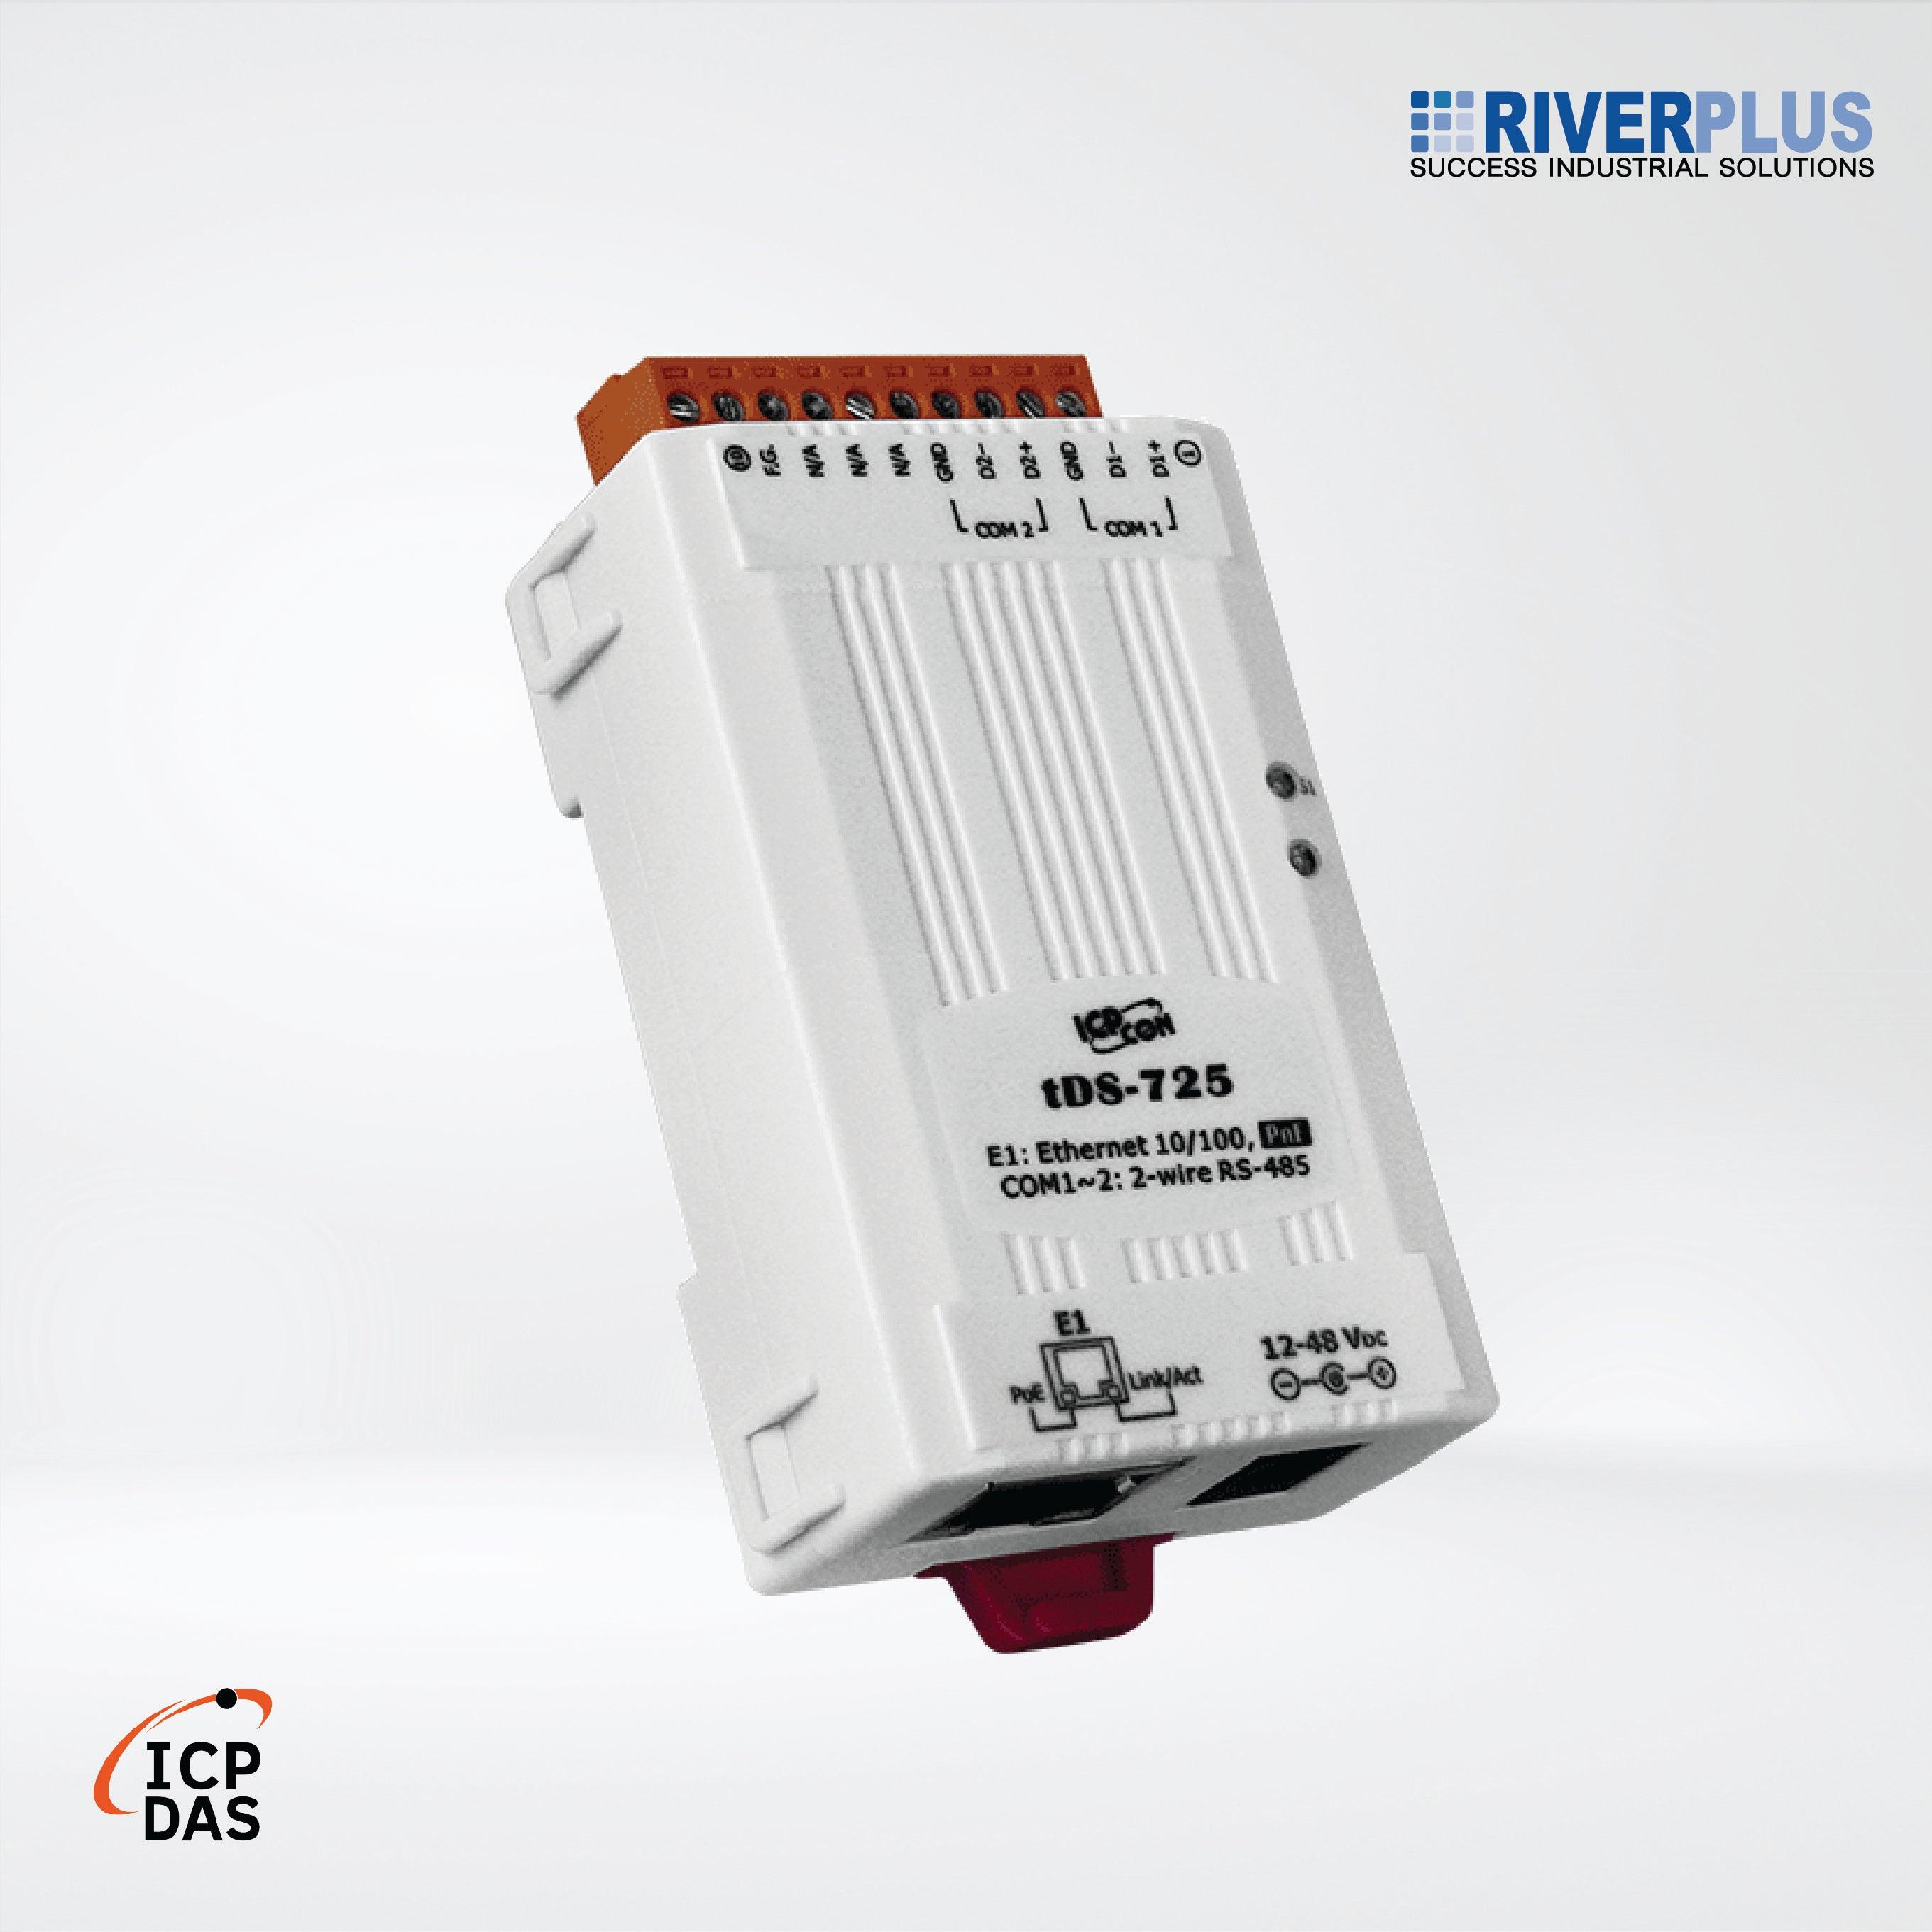 tDS-725 CR Tiny (2x RS-485) Serial-to-Ethernet Device Server with PoE - Riverplus